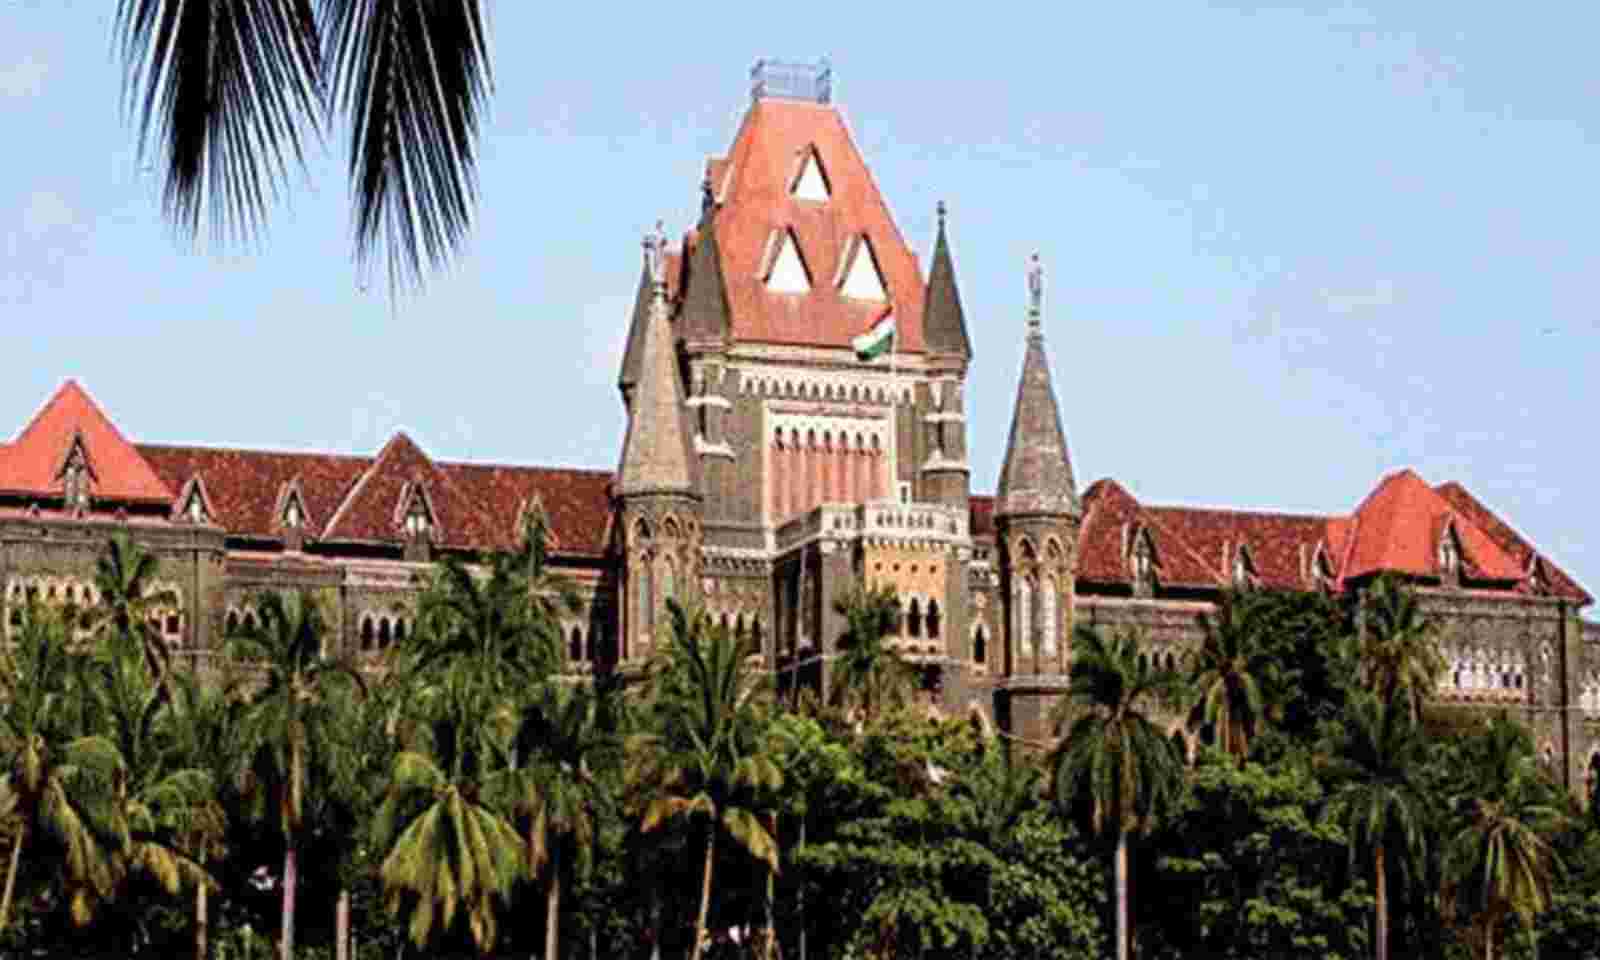 Novation Of Partnership Deed, Arbitration Clause Contained In The Deed Can Be Invoked: Bombay High Court